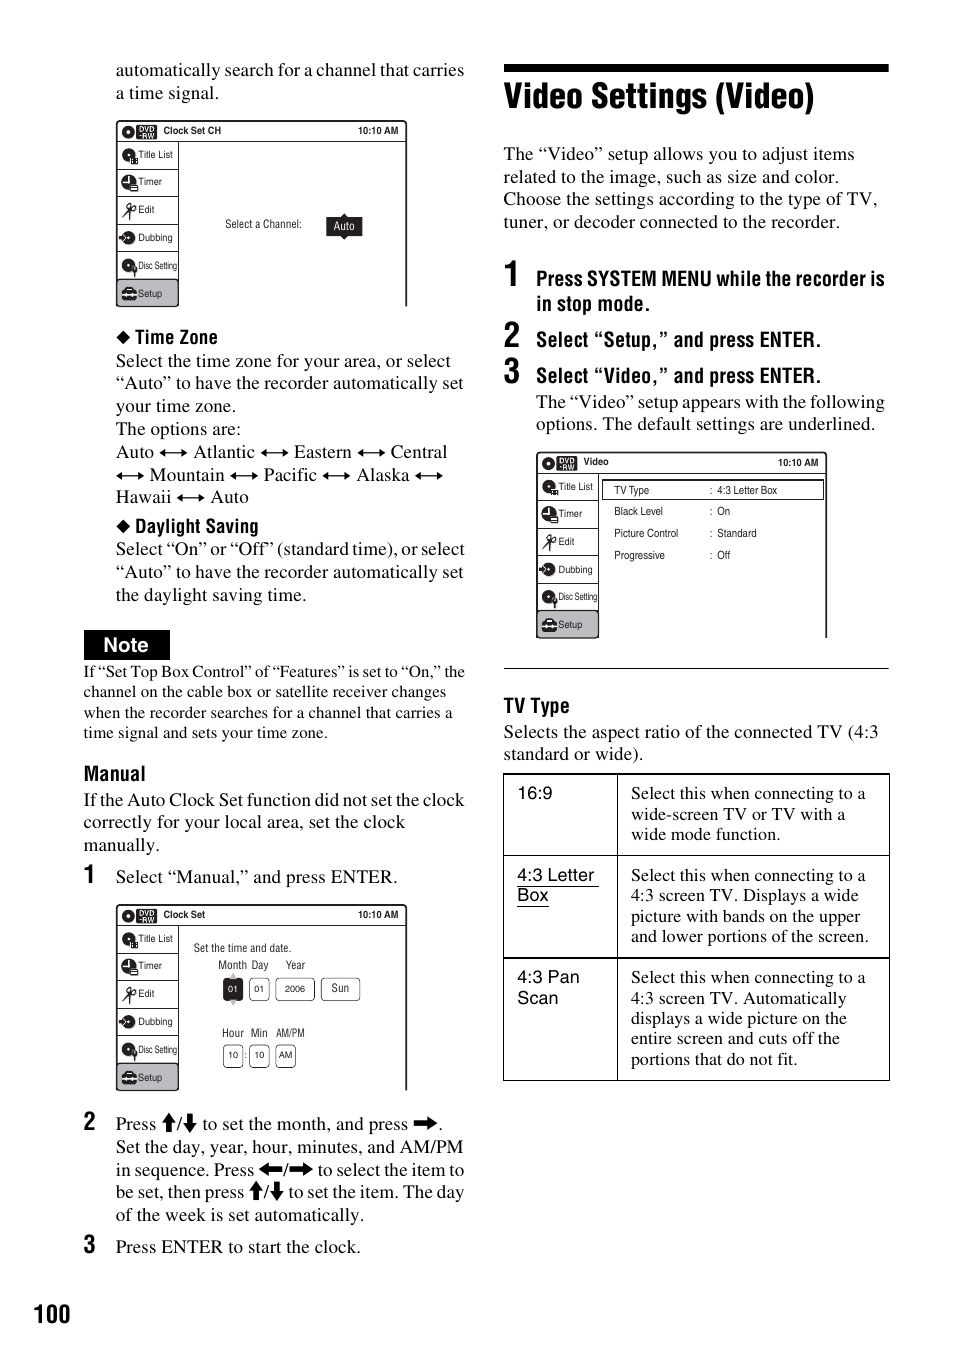 Video settings (video), Manual, Select “setup,” and press enter | Select “video,” and press enter, Tv type, Select “manual,” and press enter, Press enter to start the clock | Sony RDR-VX521 User Manual | Page 100 / 132